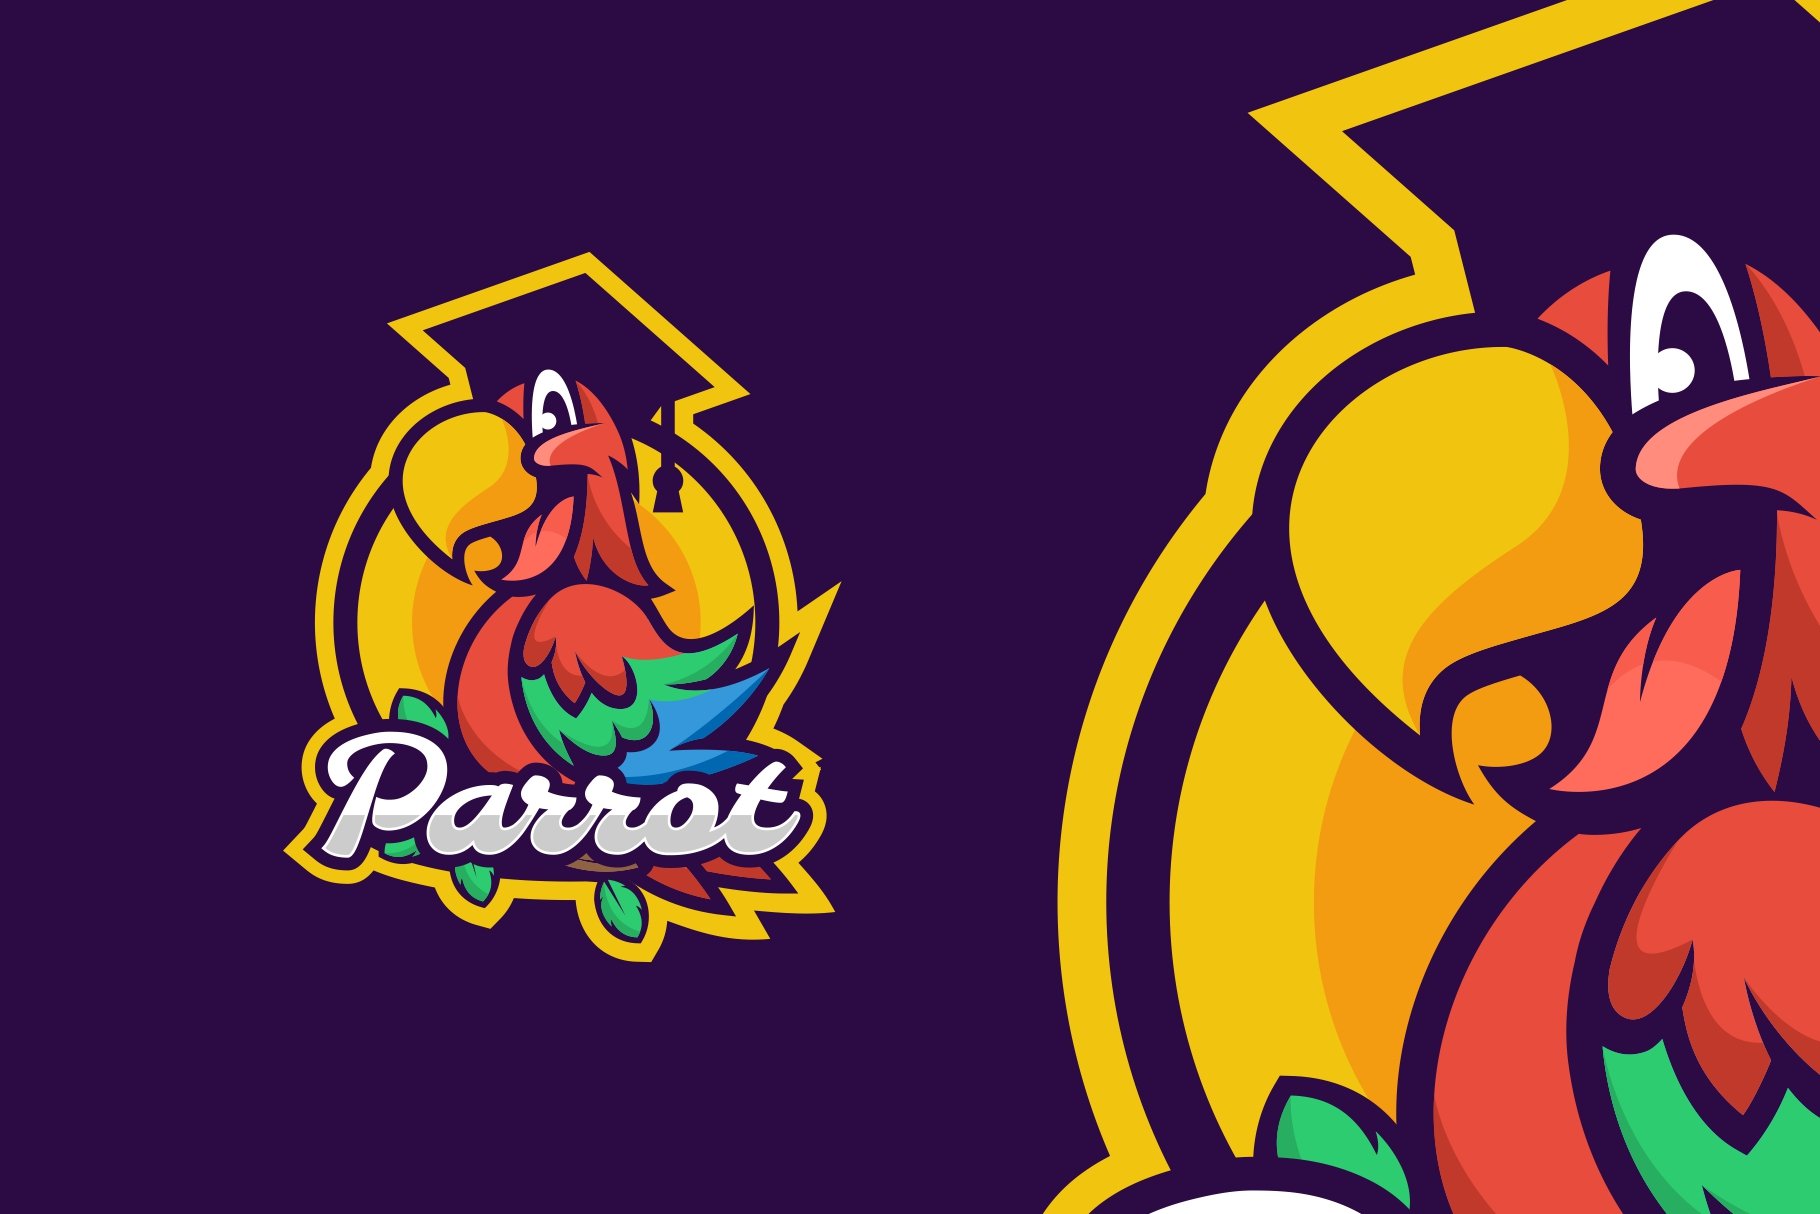 Parrot Cartoon Character Logo cover image.